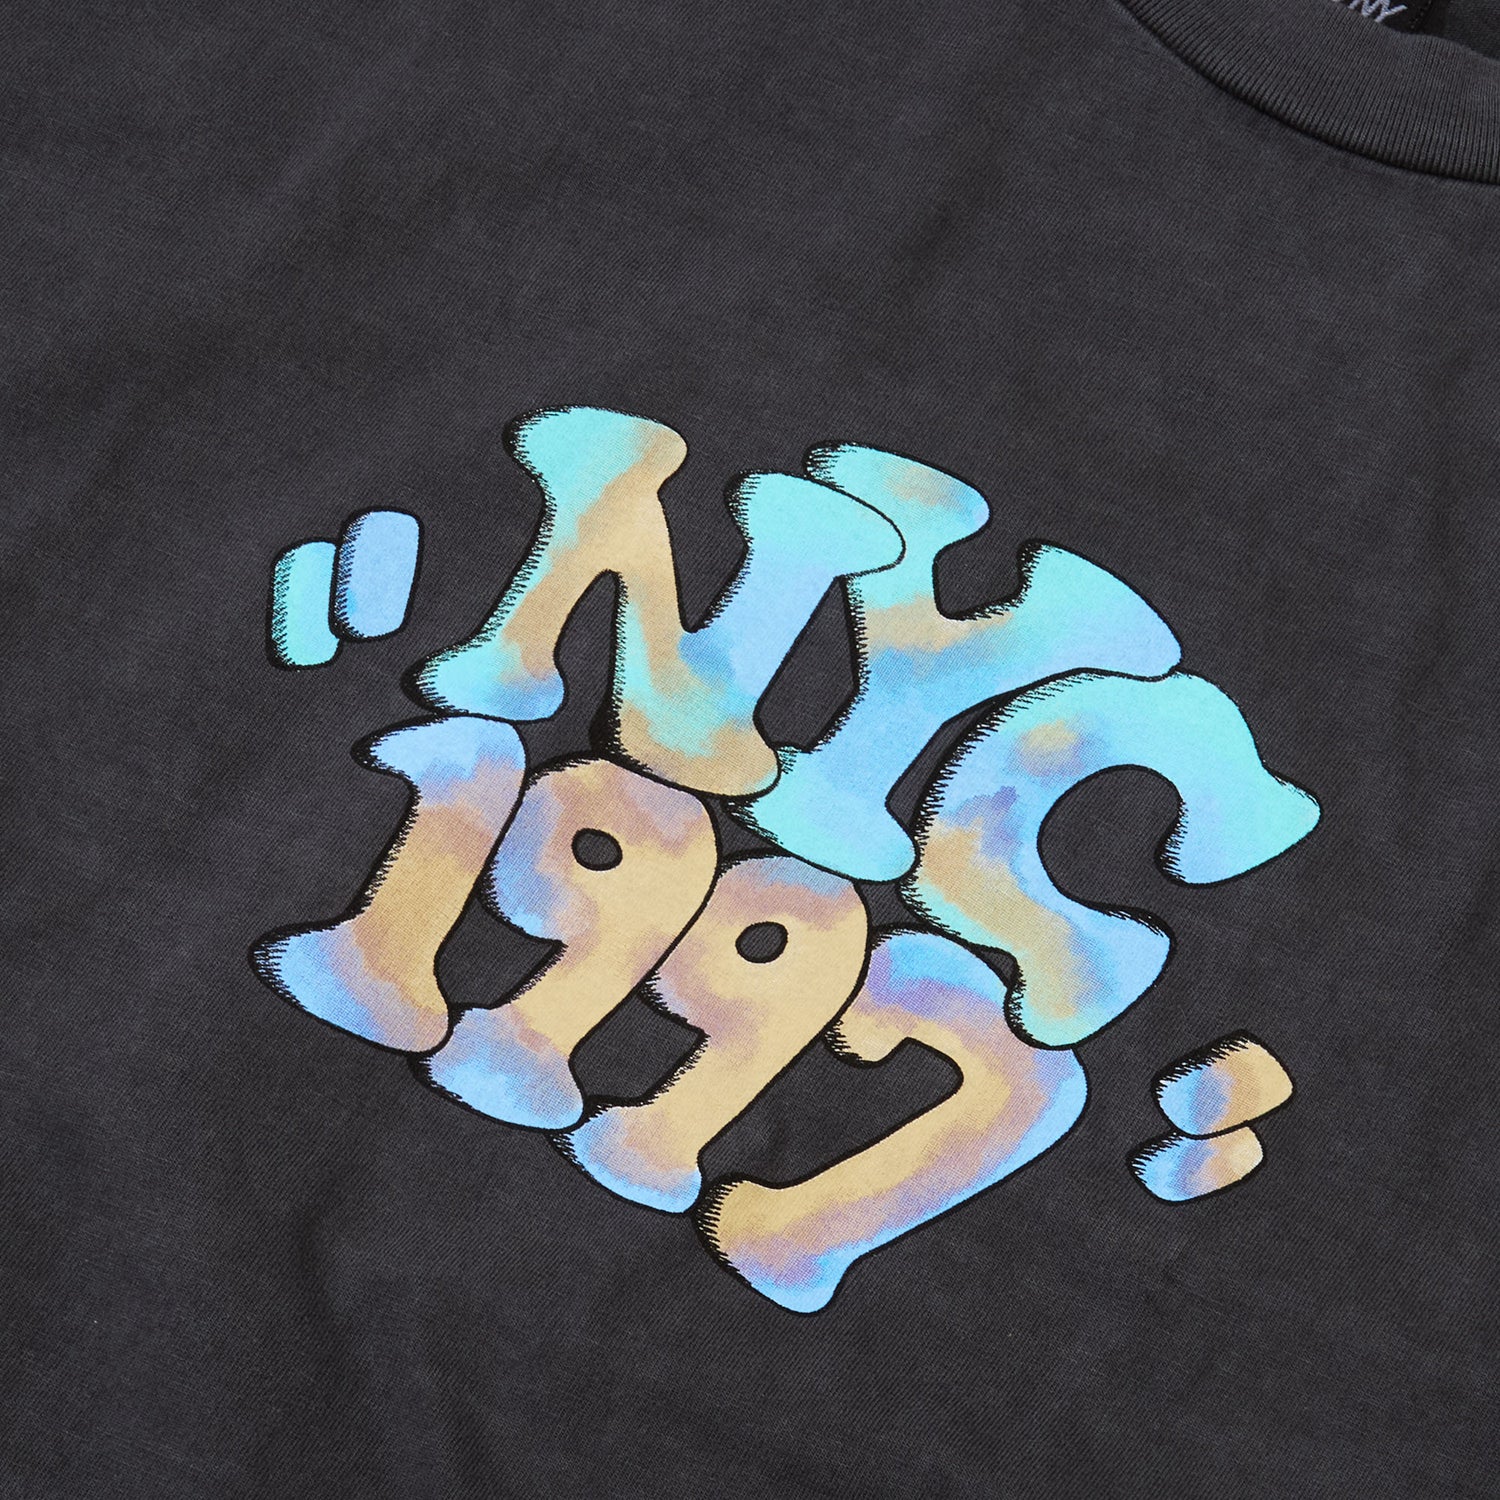 Only NY NYC 1997 Watercolor T-Shirt - Vintage Black